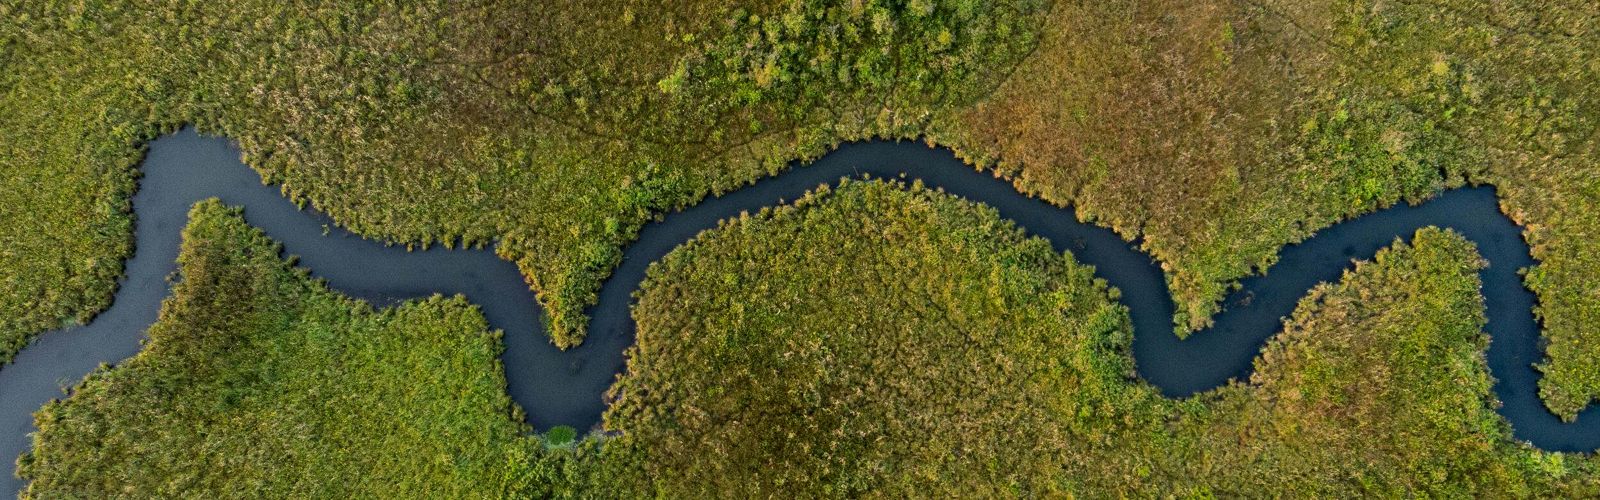 Aerial of dense forest carved by a curving blue river.